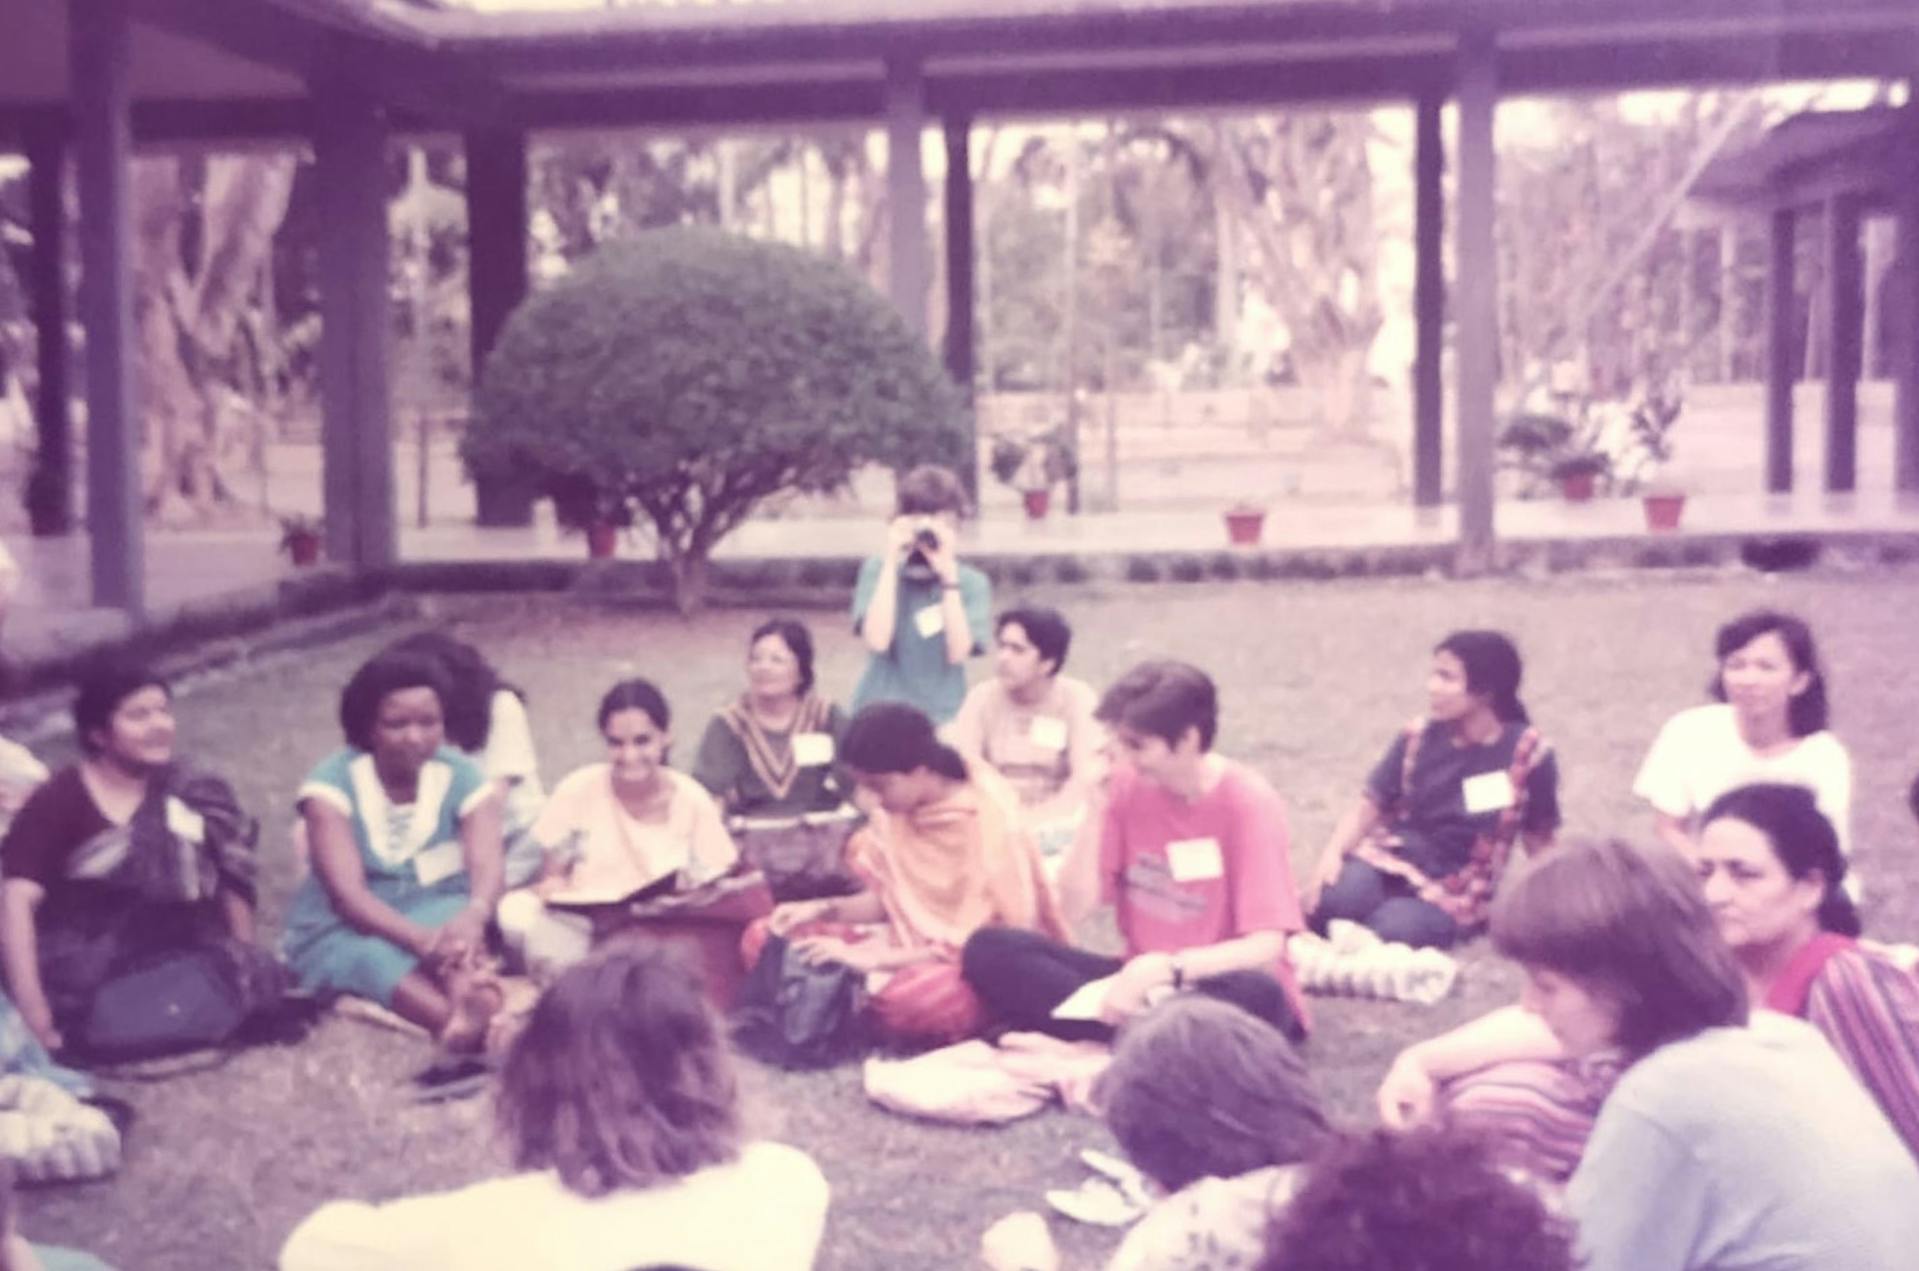 Members of the Feminist International Network of Resistance to Reproductive and Genetic Engineering (FINRRAGE) at a conference in Comilla, Bangladesh in 1989. Courtesy Chayanika Shah